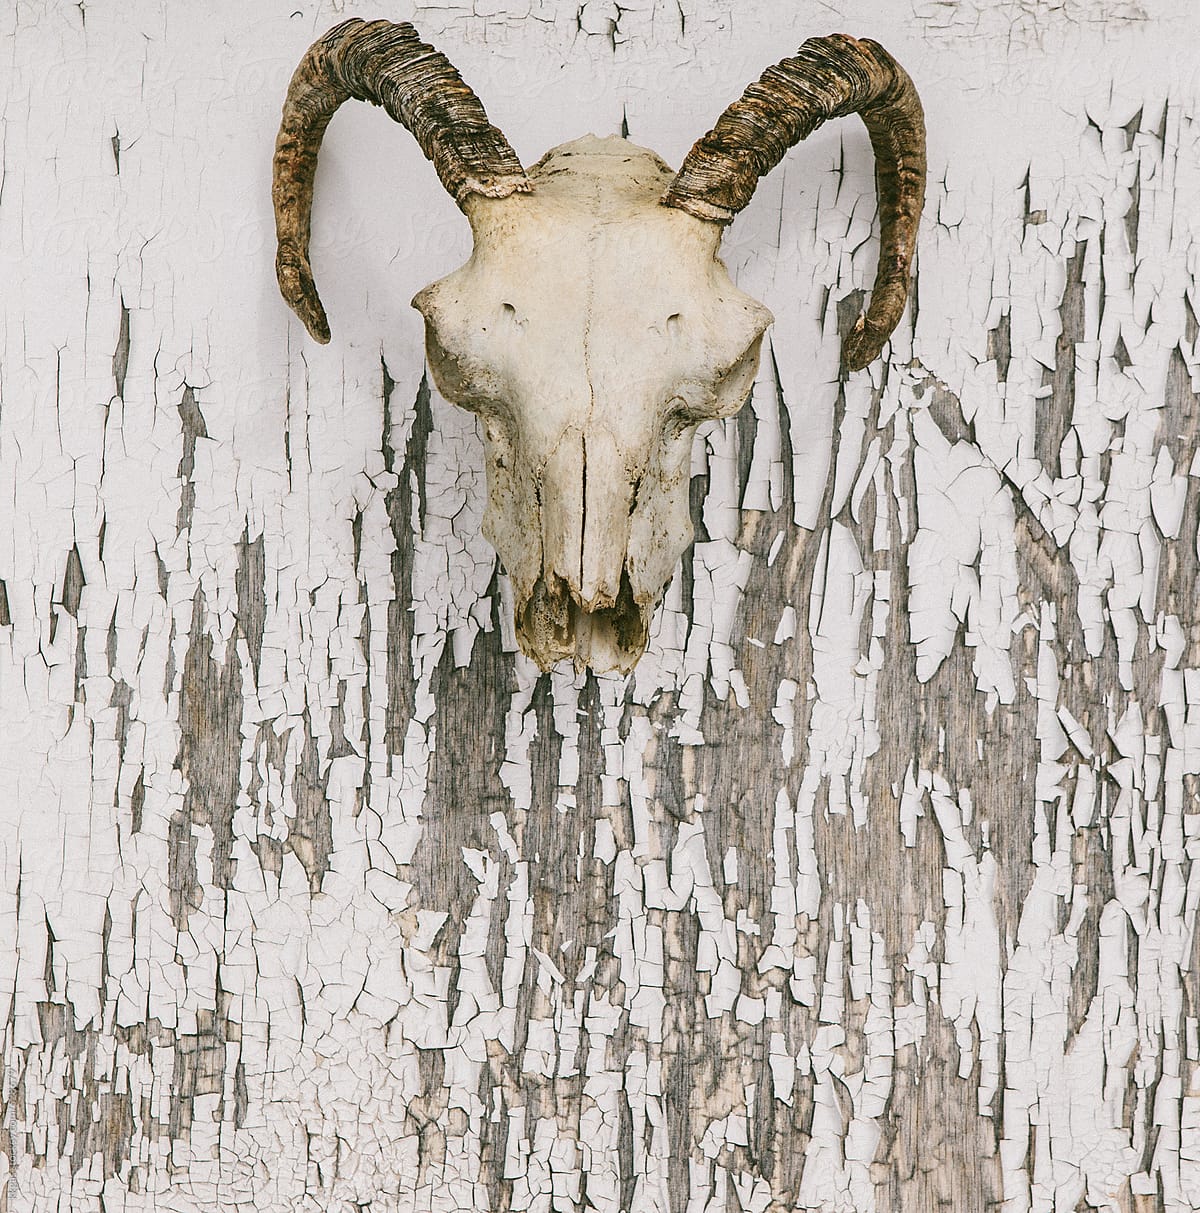 Rams skull over distressed paint background